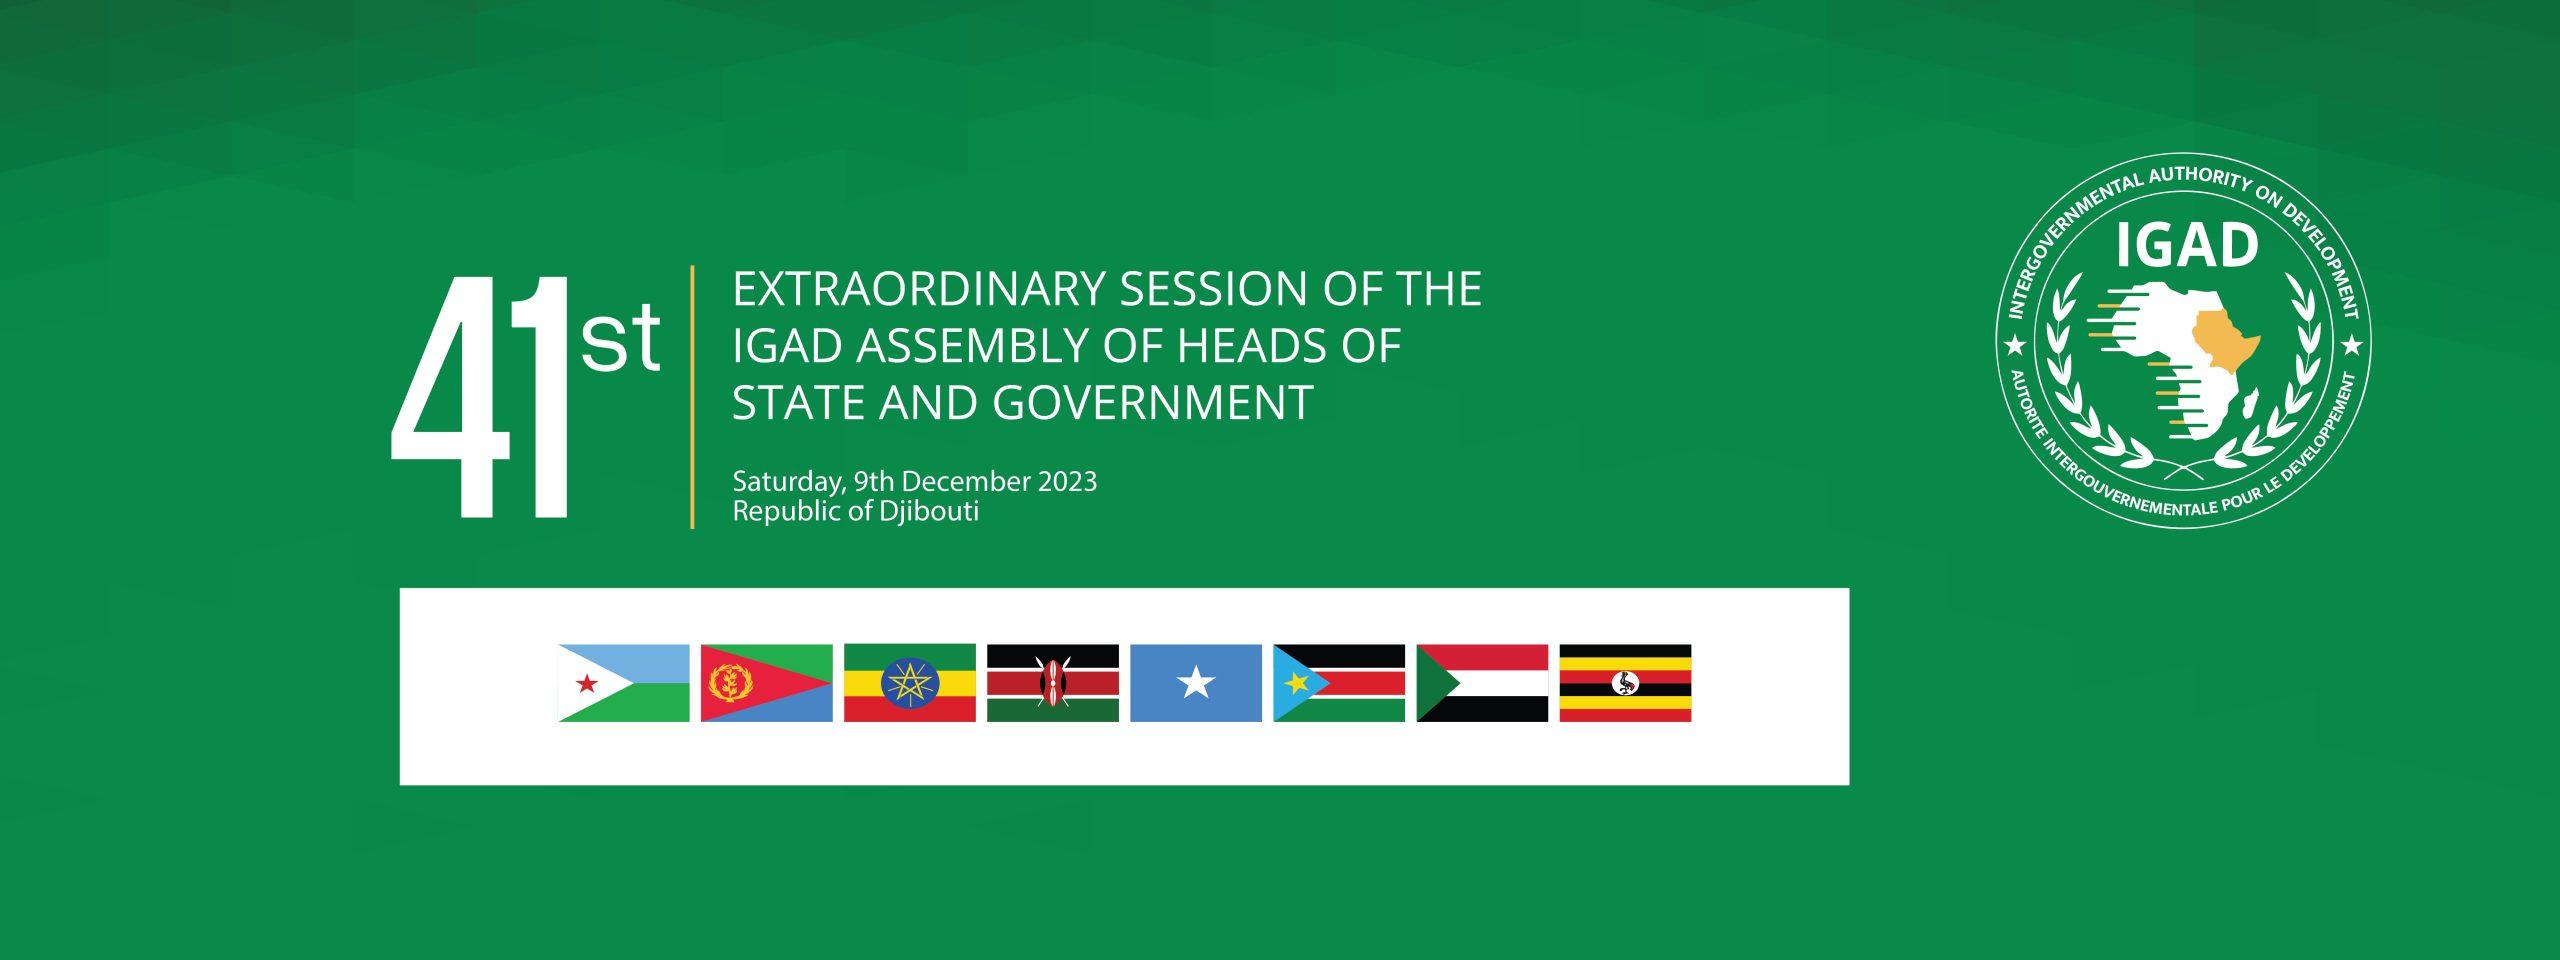 Extra-Ordinary Summit of IGAD Heads of State and Government